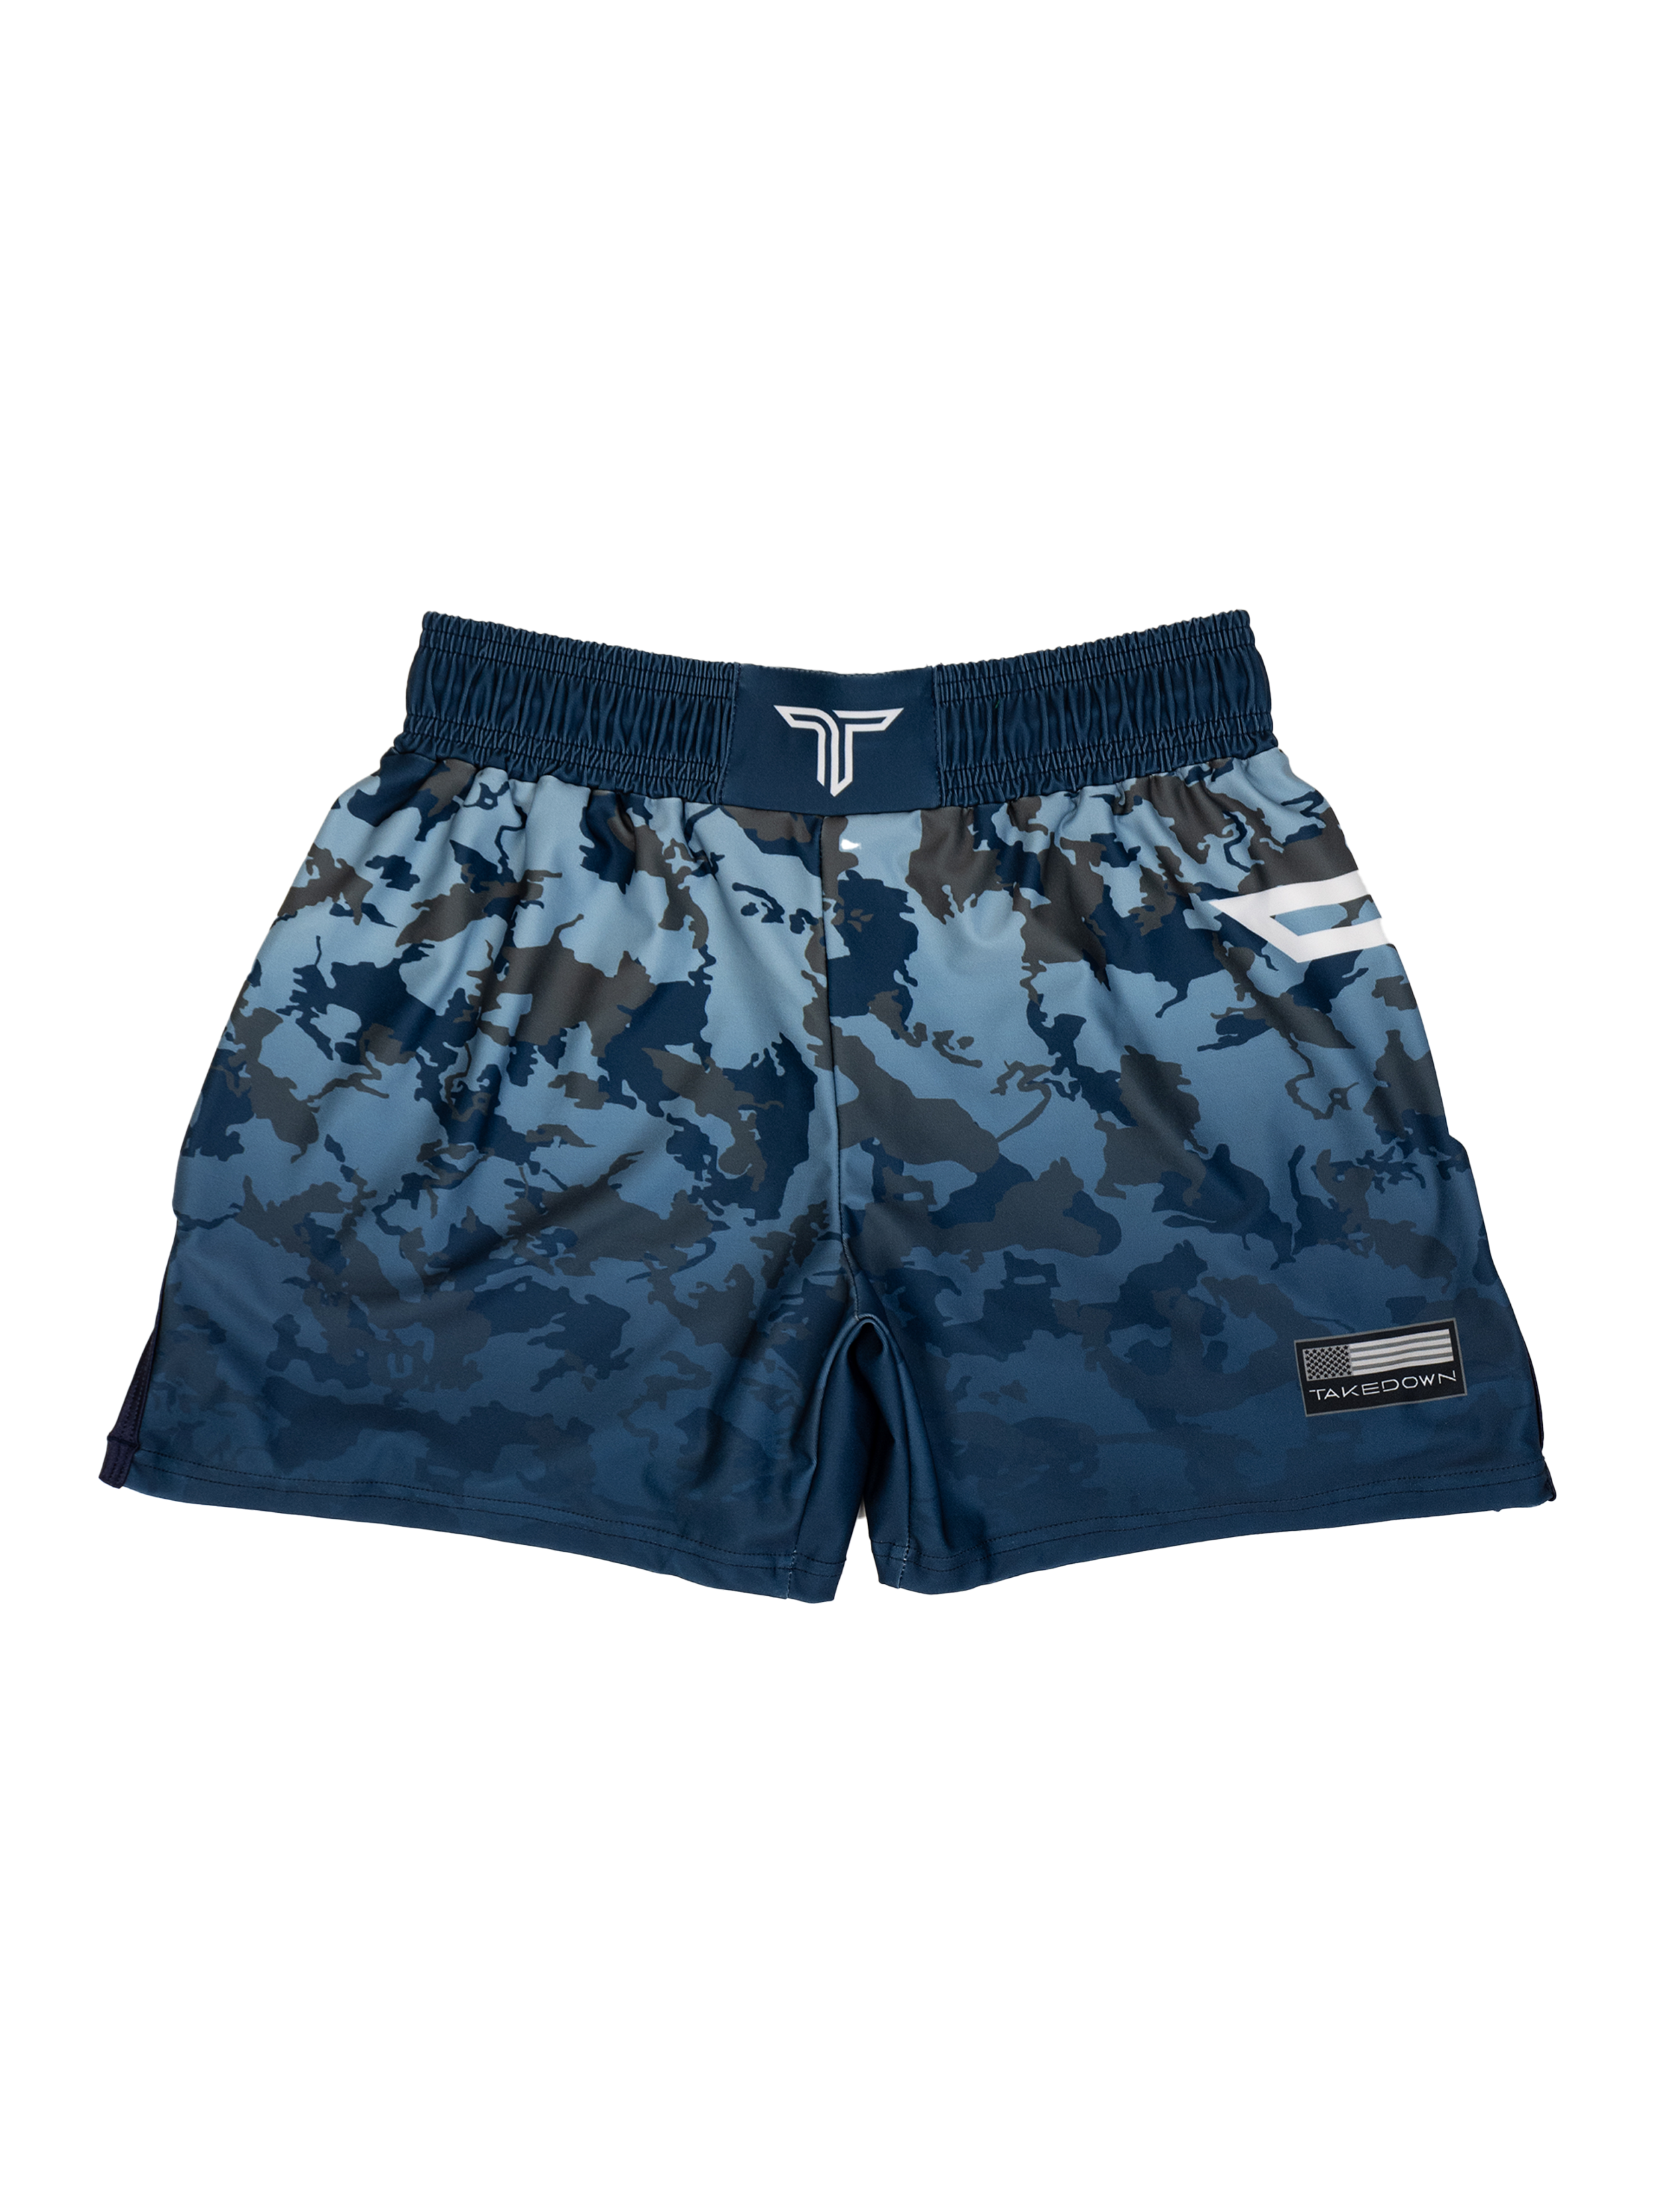 Particle Camo Women's Fight Shorts - Ink (3